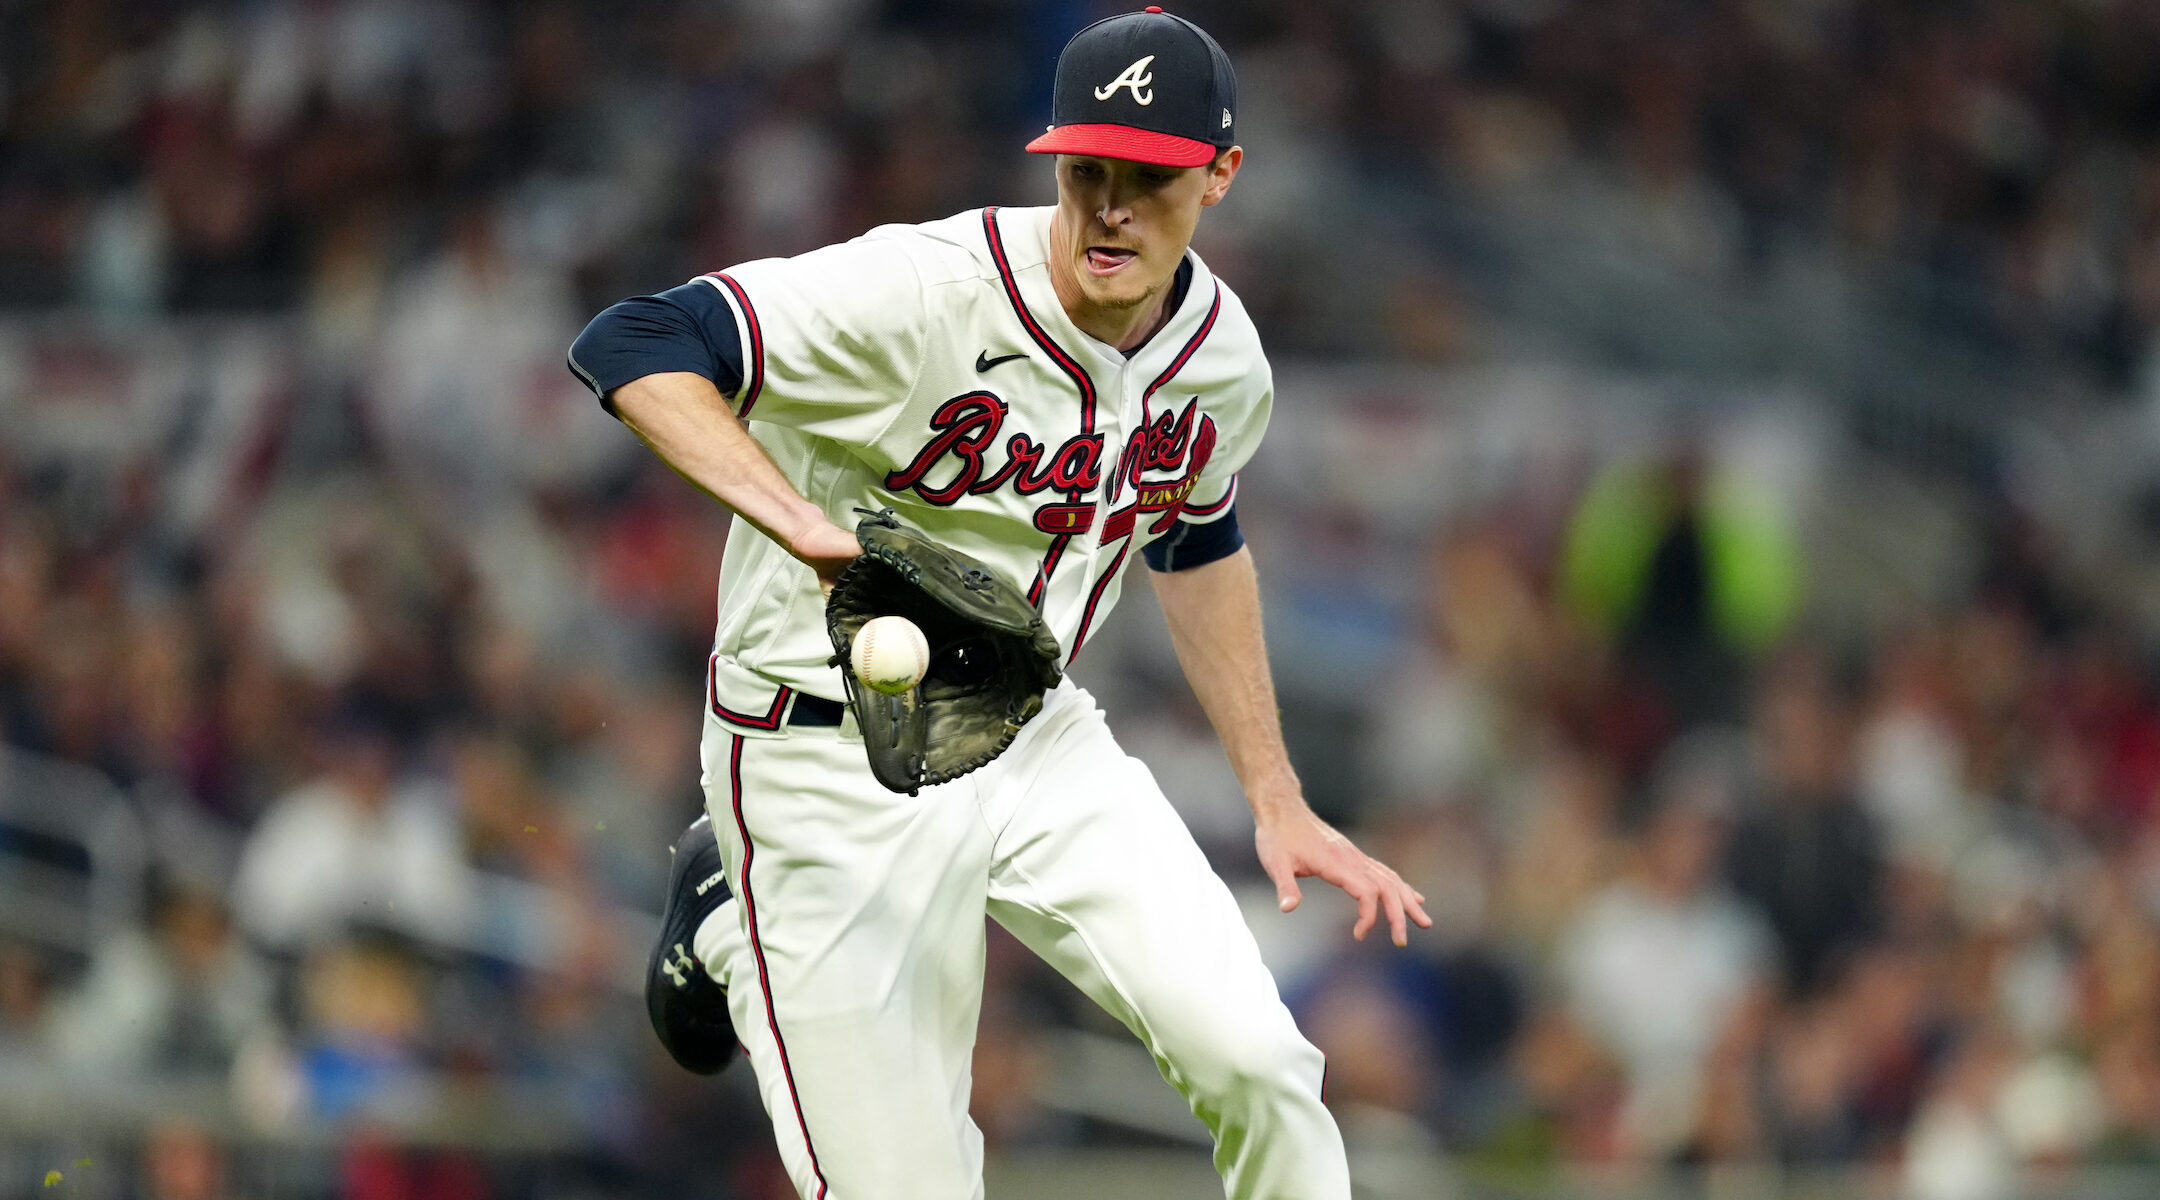 With pitchers fried, Braves' Max Fried tries to win World Series